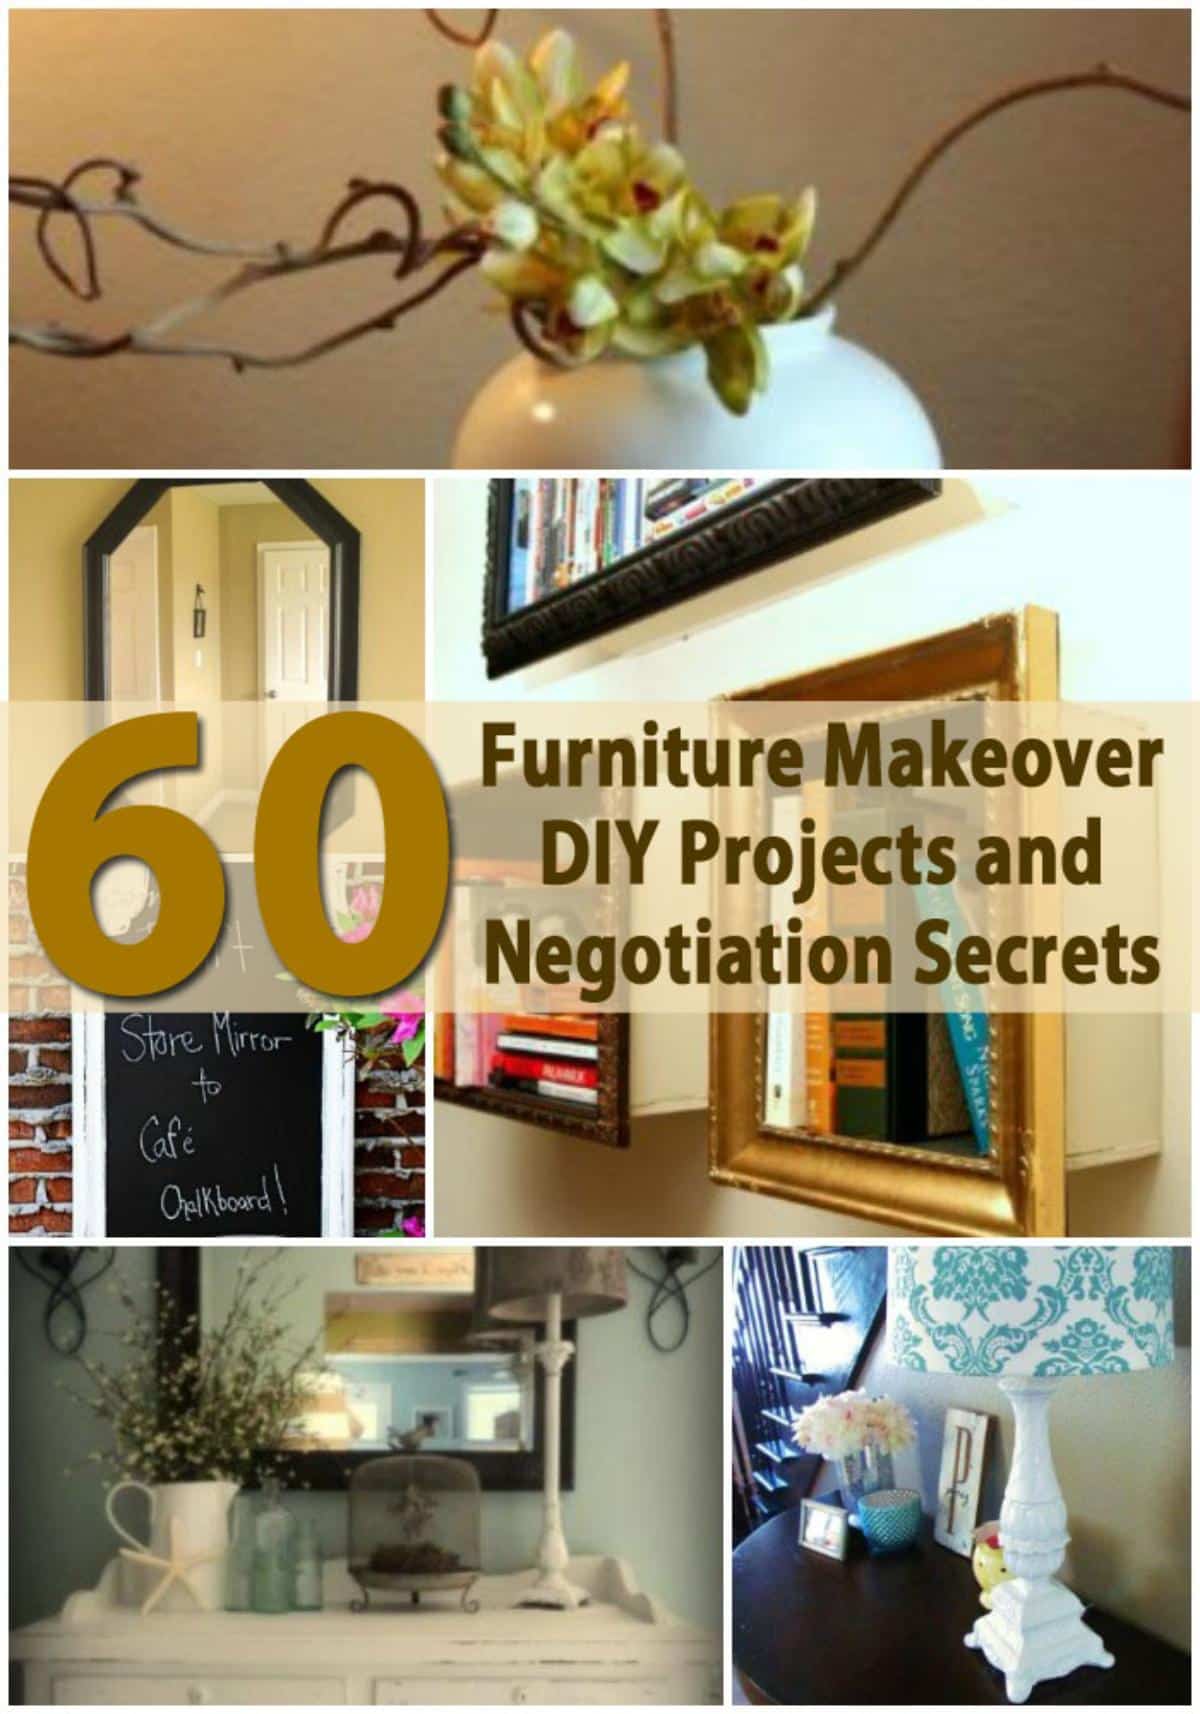 Top 60 Furniture Makeover DIY Projects and Negotiation Secrets pinterest image.